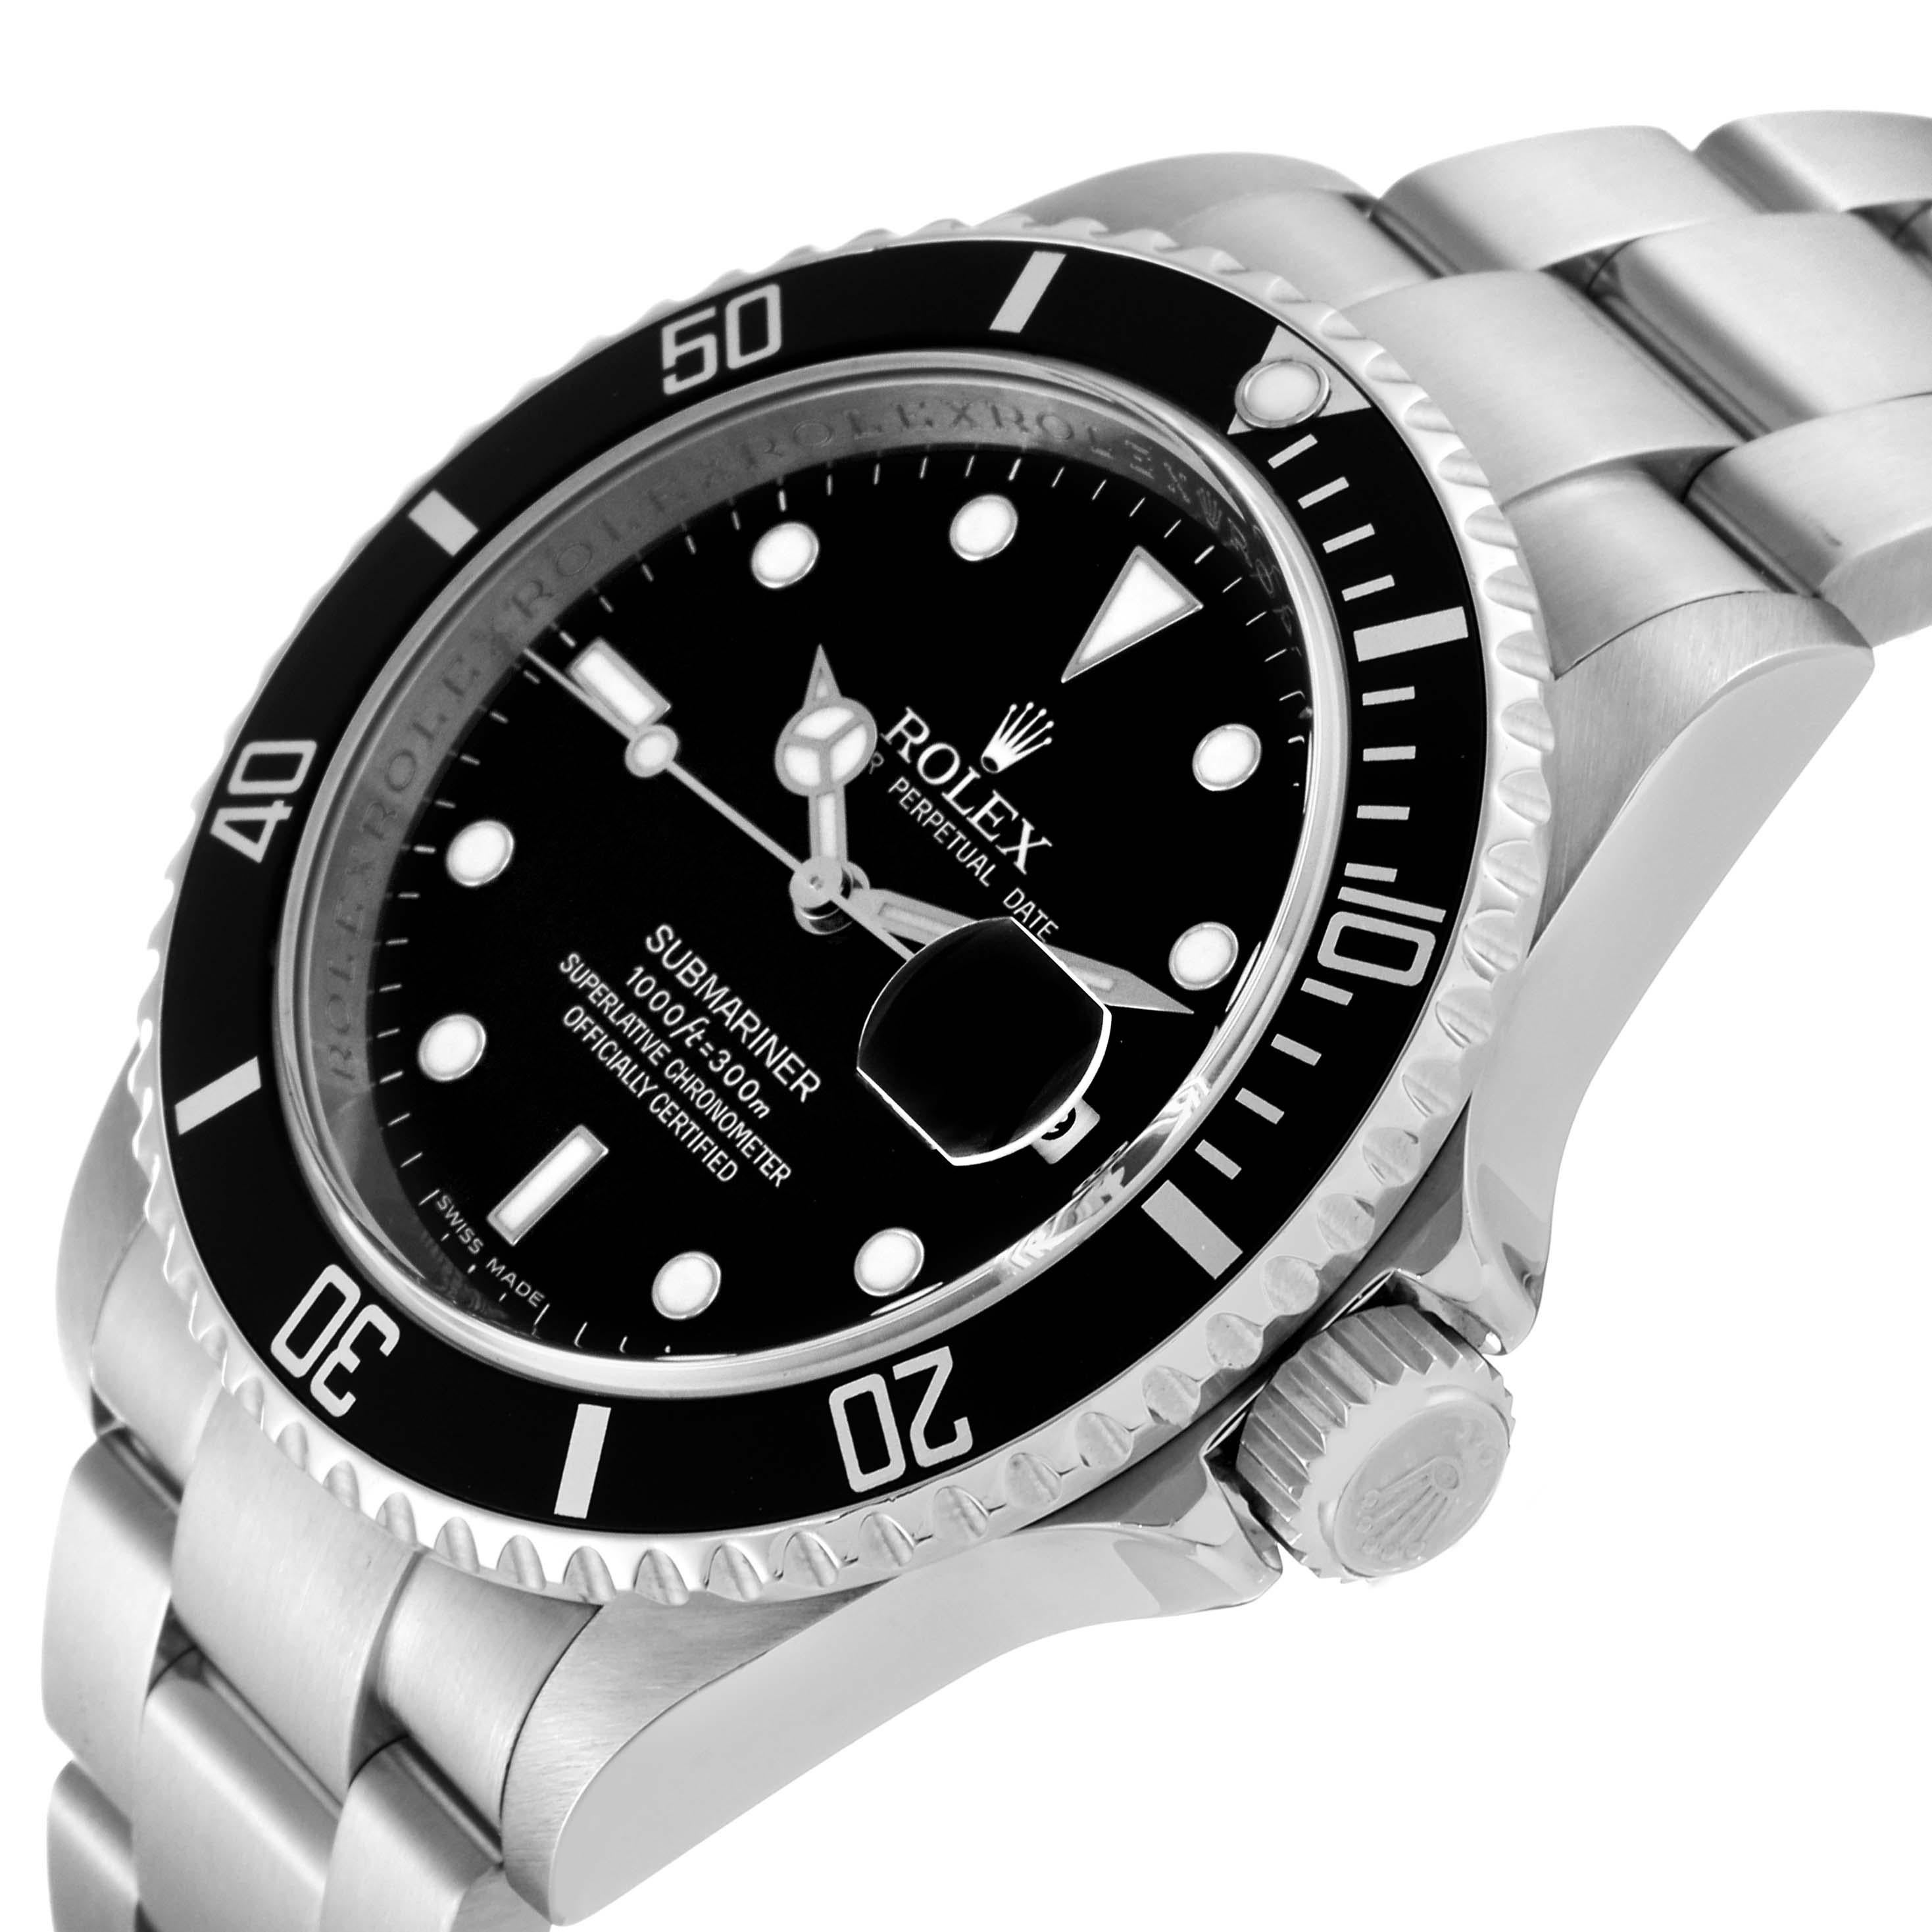 Rolex Submariner Date Black Dial Steel Mens Watch 16610 Box Card For Sale 3